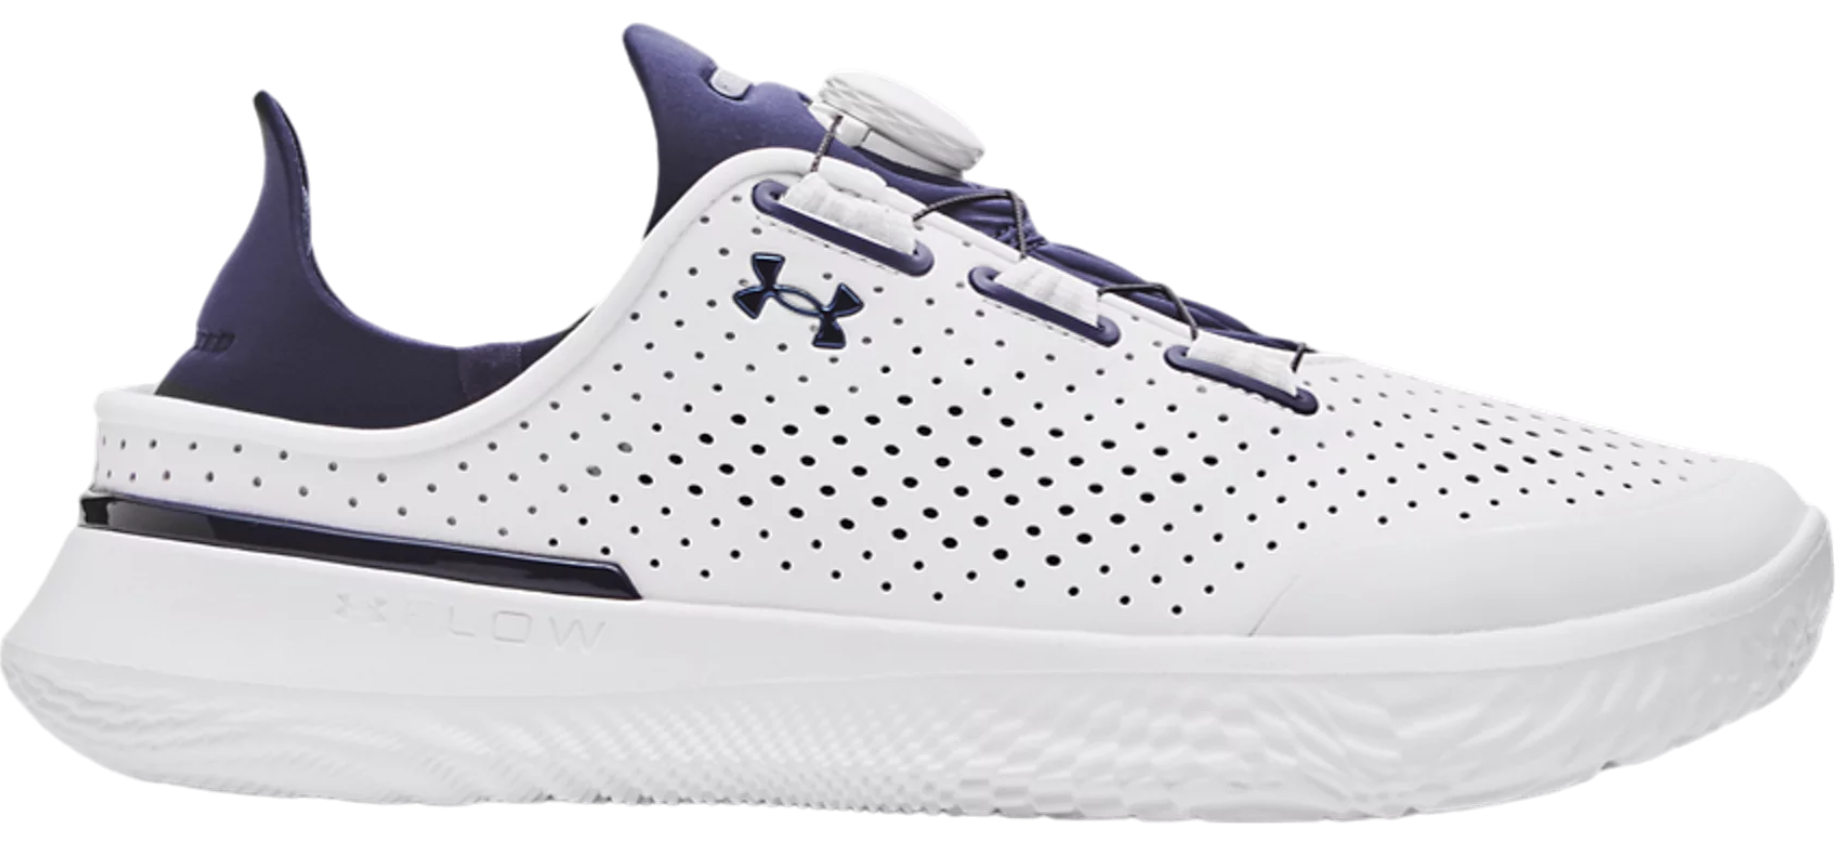 Sapatilhas de fitness Under Armour Flow Slipspeed Trainr SYN